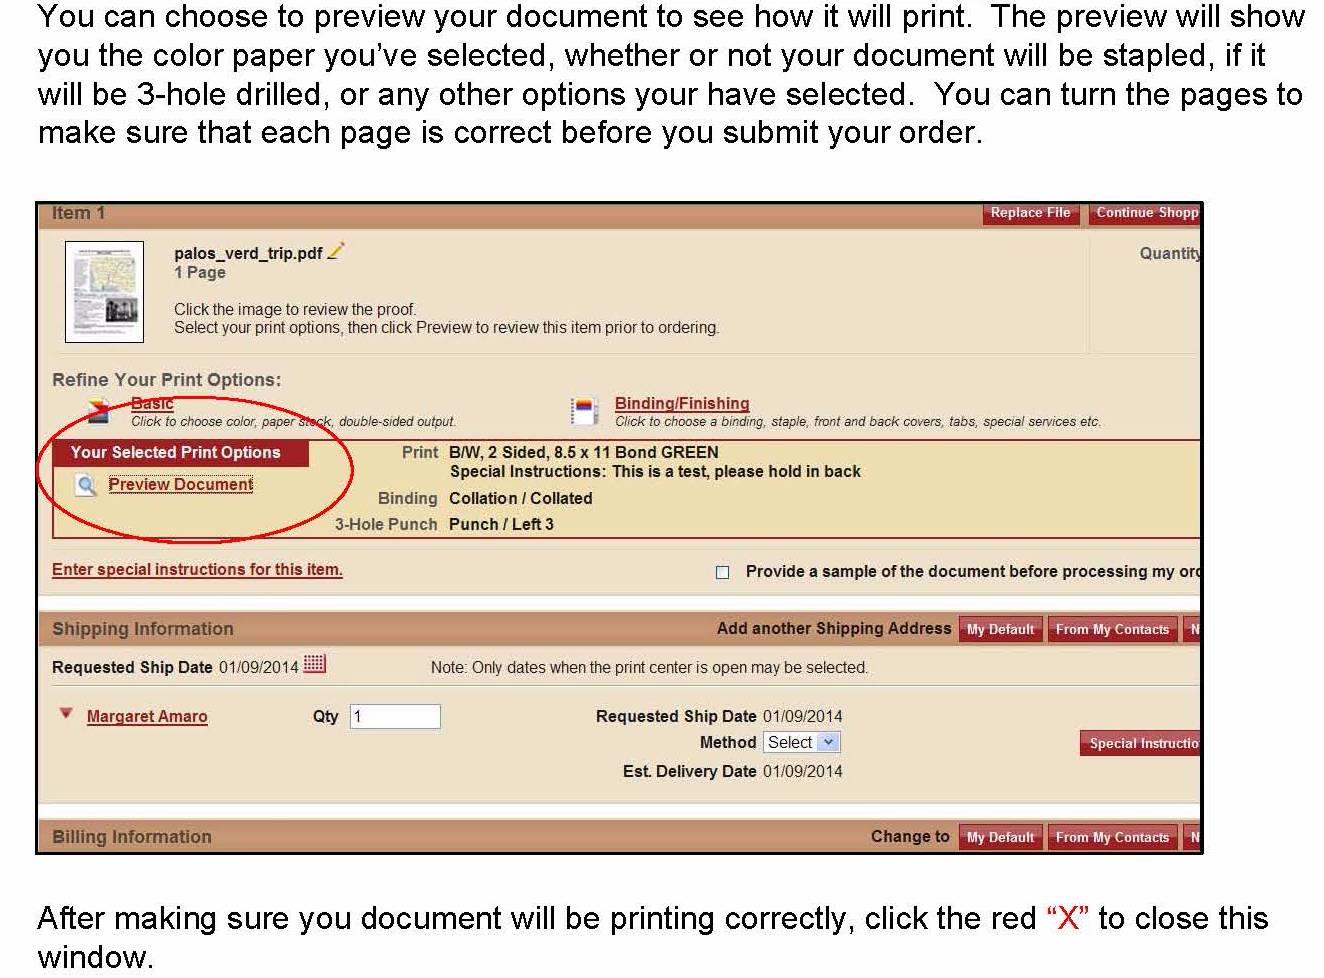 You may view a preview of the page(s) you wish to print. You can make sure each page is correct before printing.